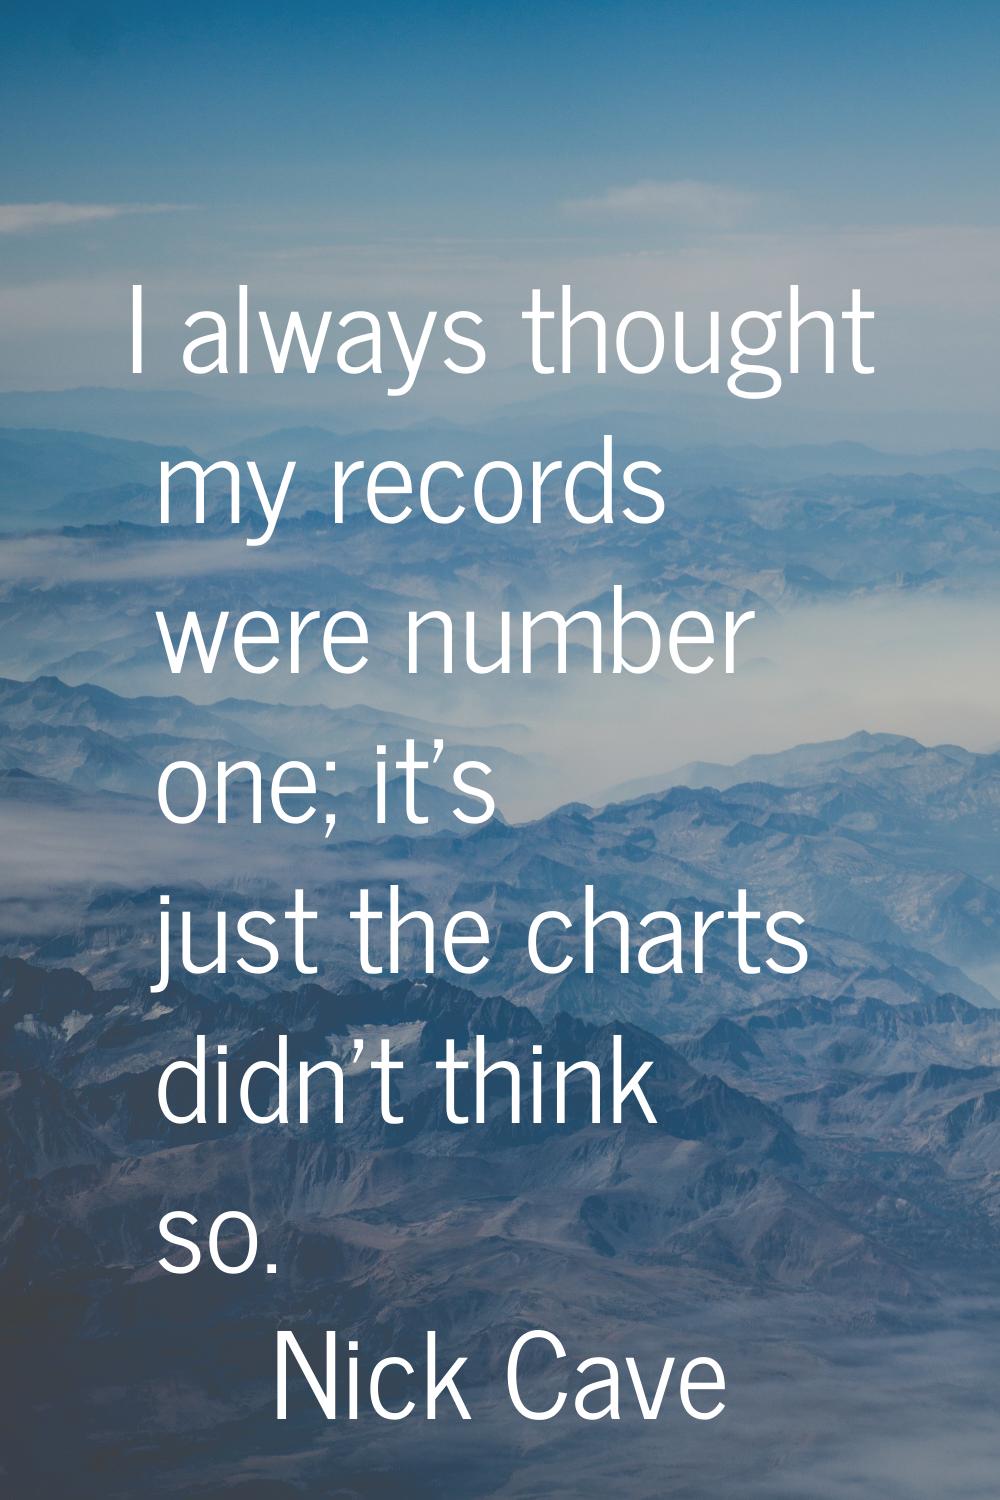 I always thought my records were number one; it's just the charts didn't think so.